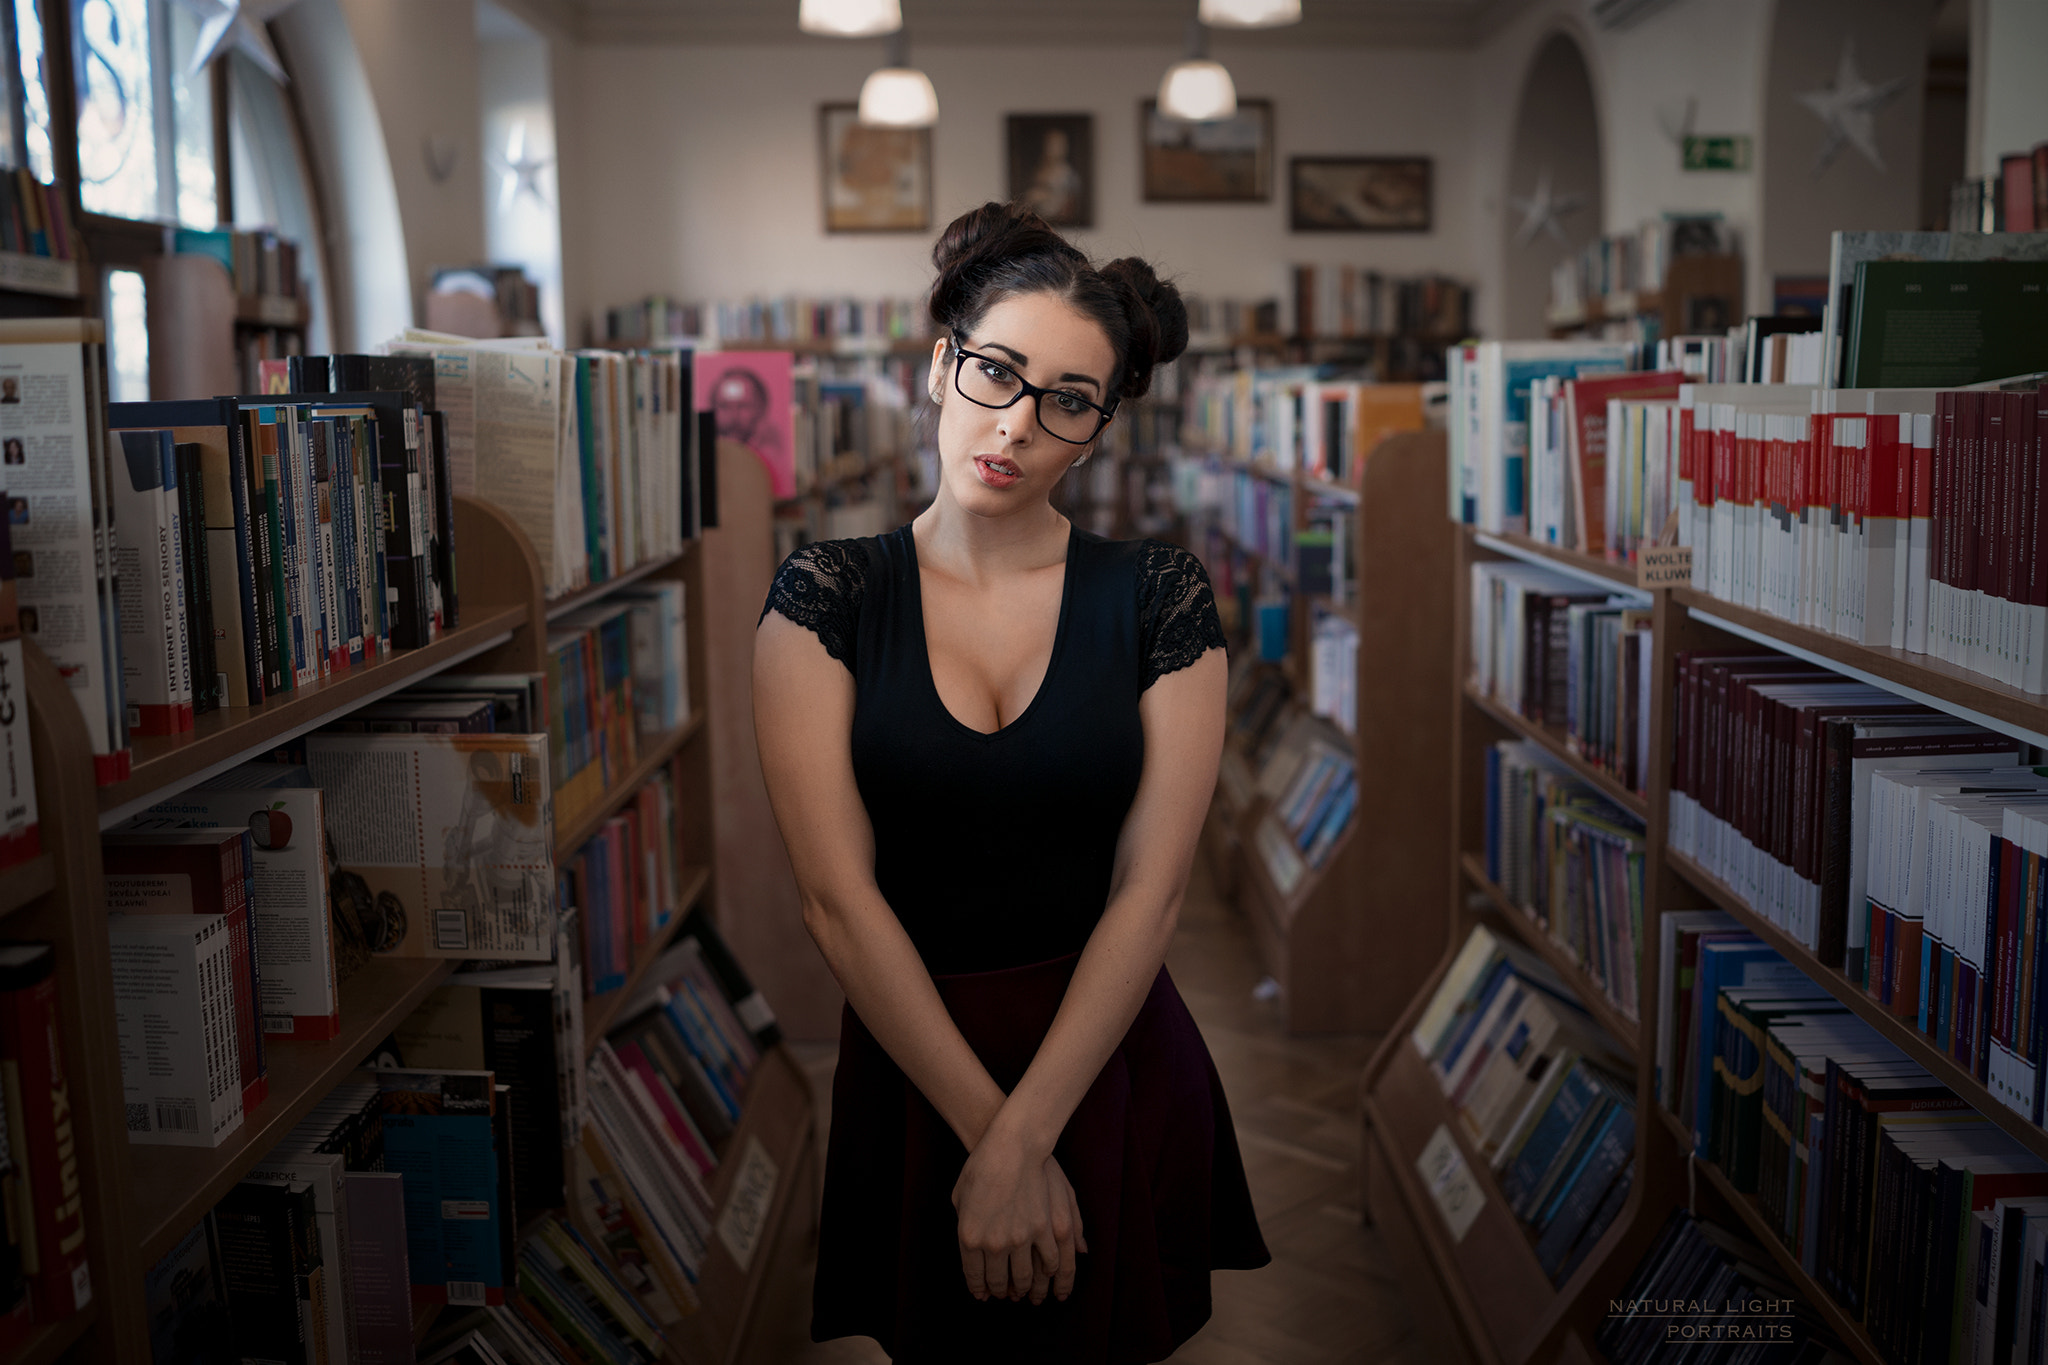 People 2048x1365 women portrait black clothing hairbun women with glasses books cleavage glasses watermarked library indoors Robert Chrenka bookshelves looking at viewer open mouth